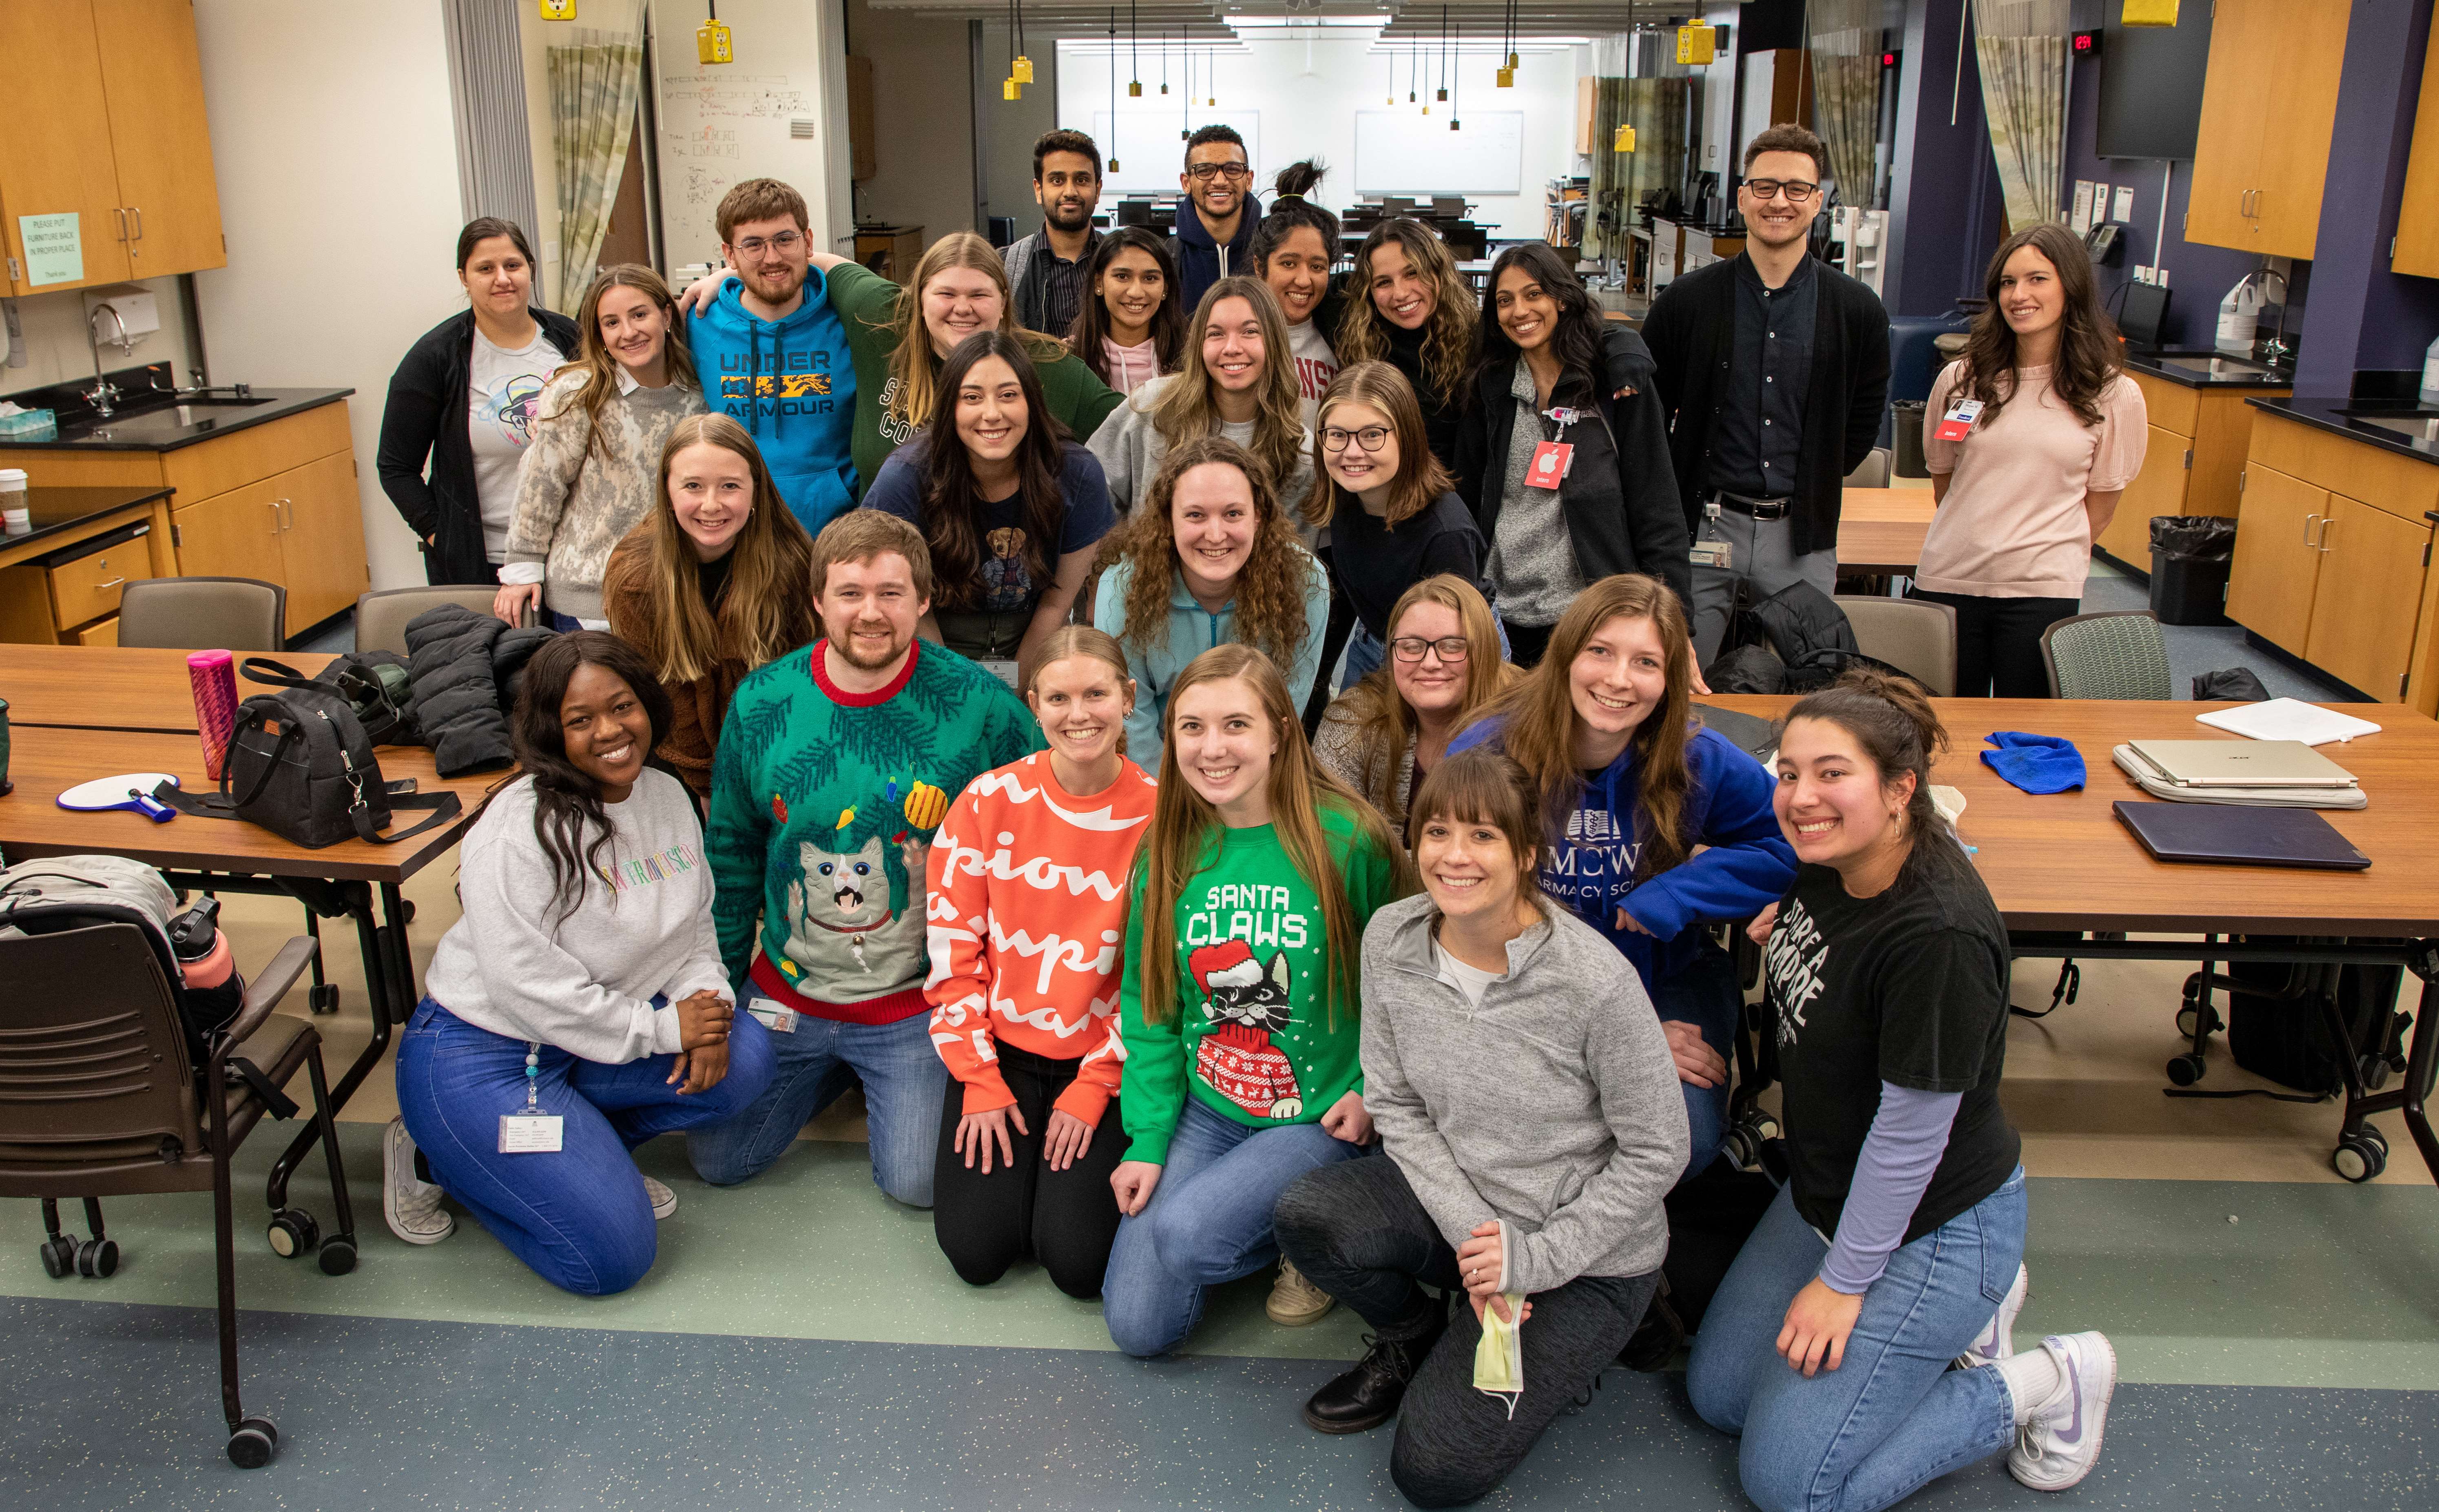 Class of 2025 pharmacy students pose together for a group photo in the classroom.